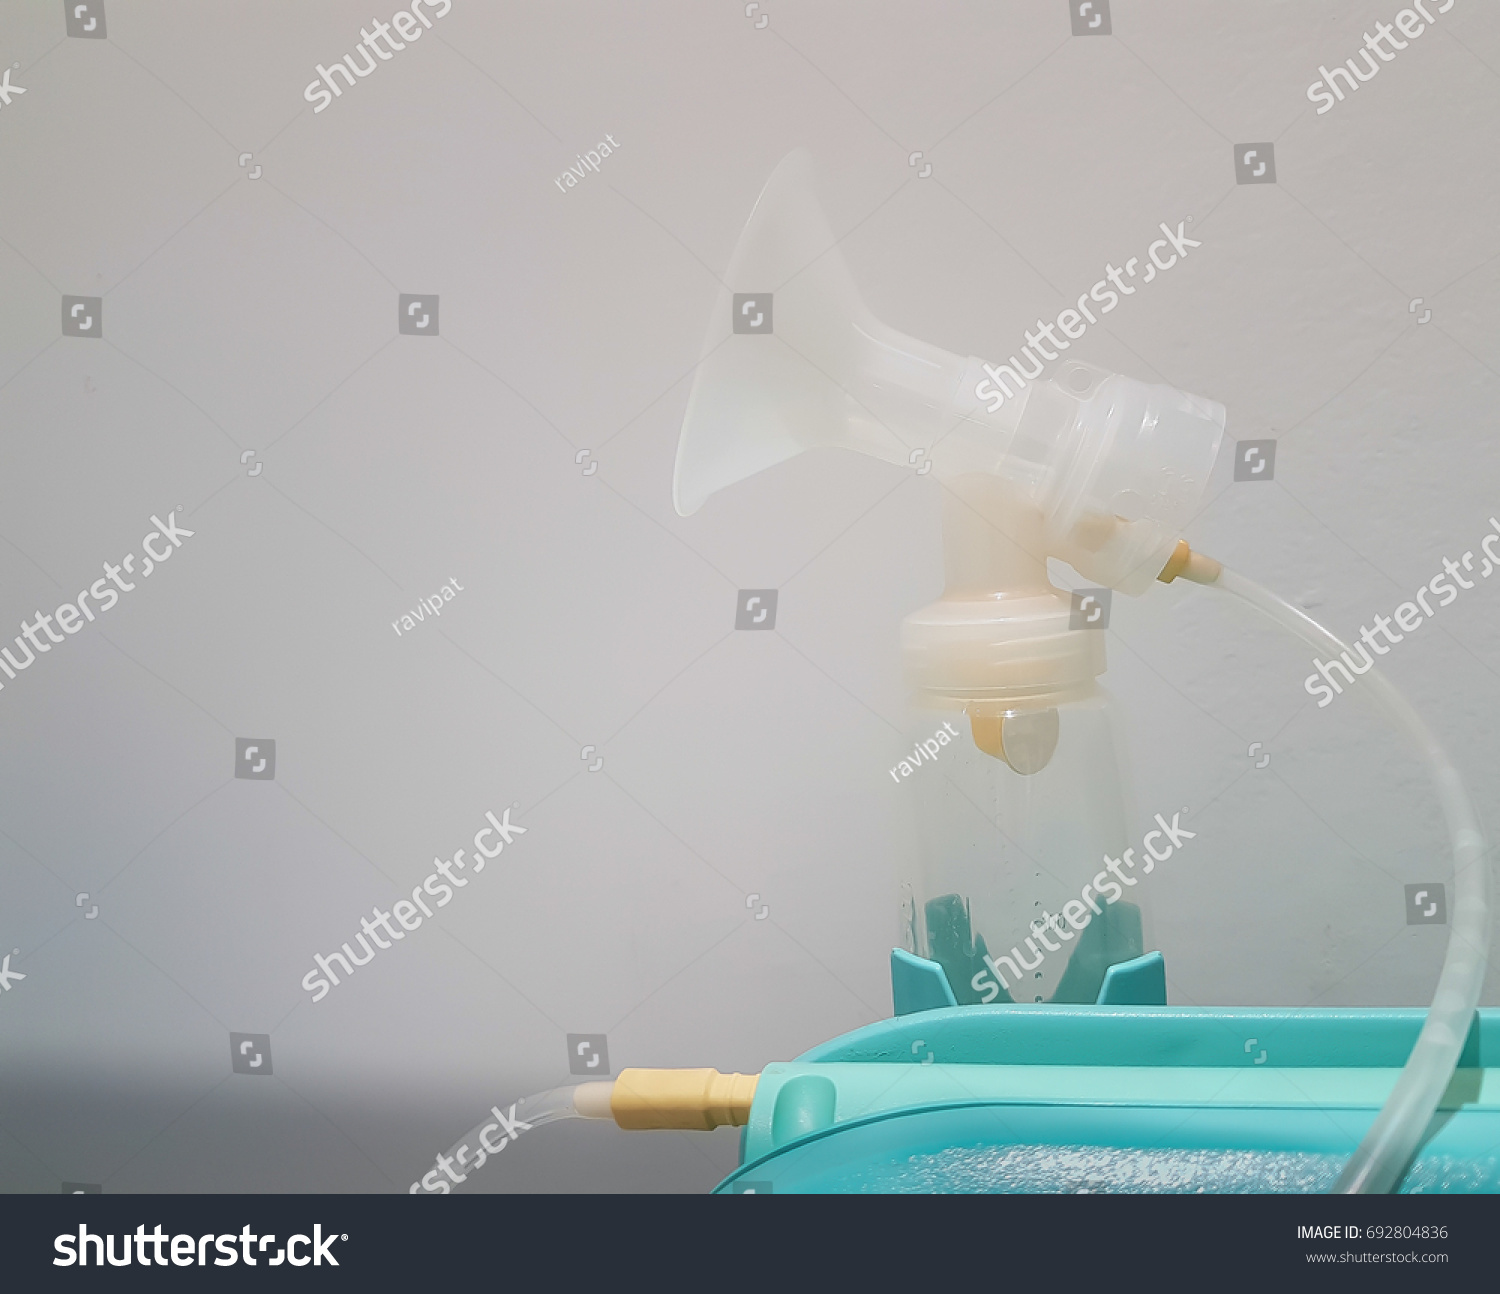 Breast pump with a bottle filled with breast milk .A breast pump is a mechanical device that extracts milk from the breasts of a lactating woman, Electric Breast Pump. #692804836